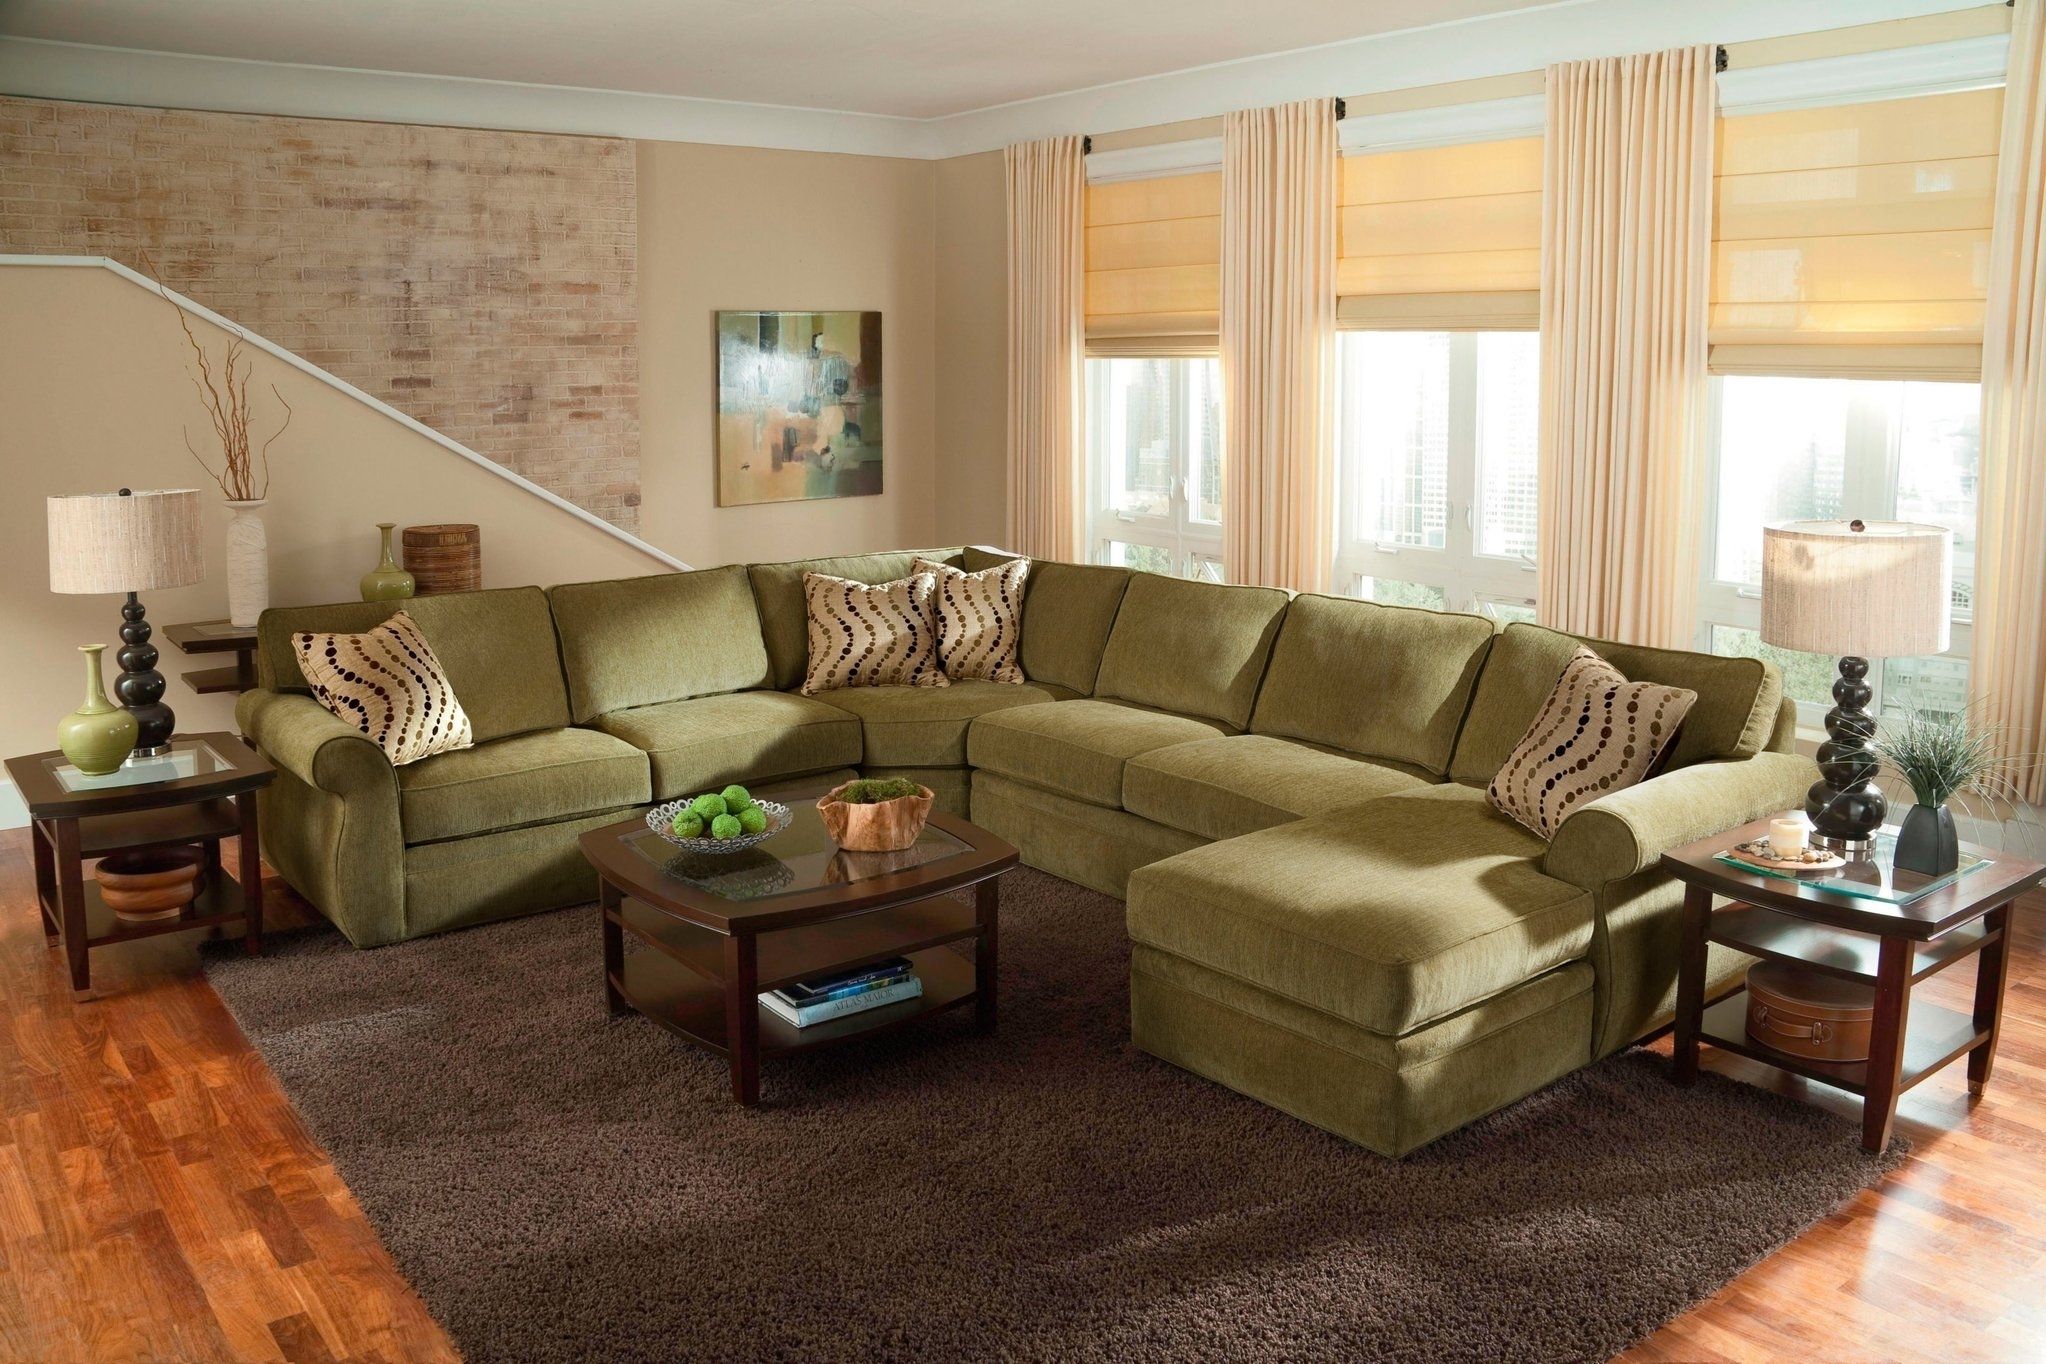 Large Scale U Shaped Sectional Sofa Set | Many Fabric Options 11410 With Big U Shaped Sectionals (View 2 of 10)